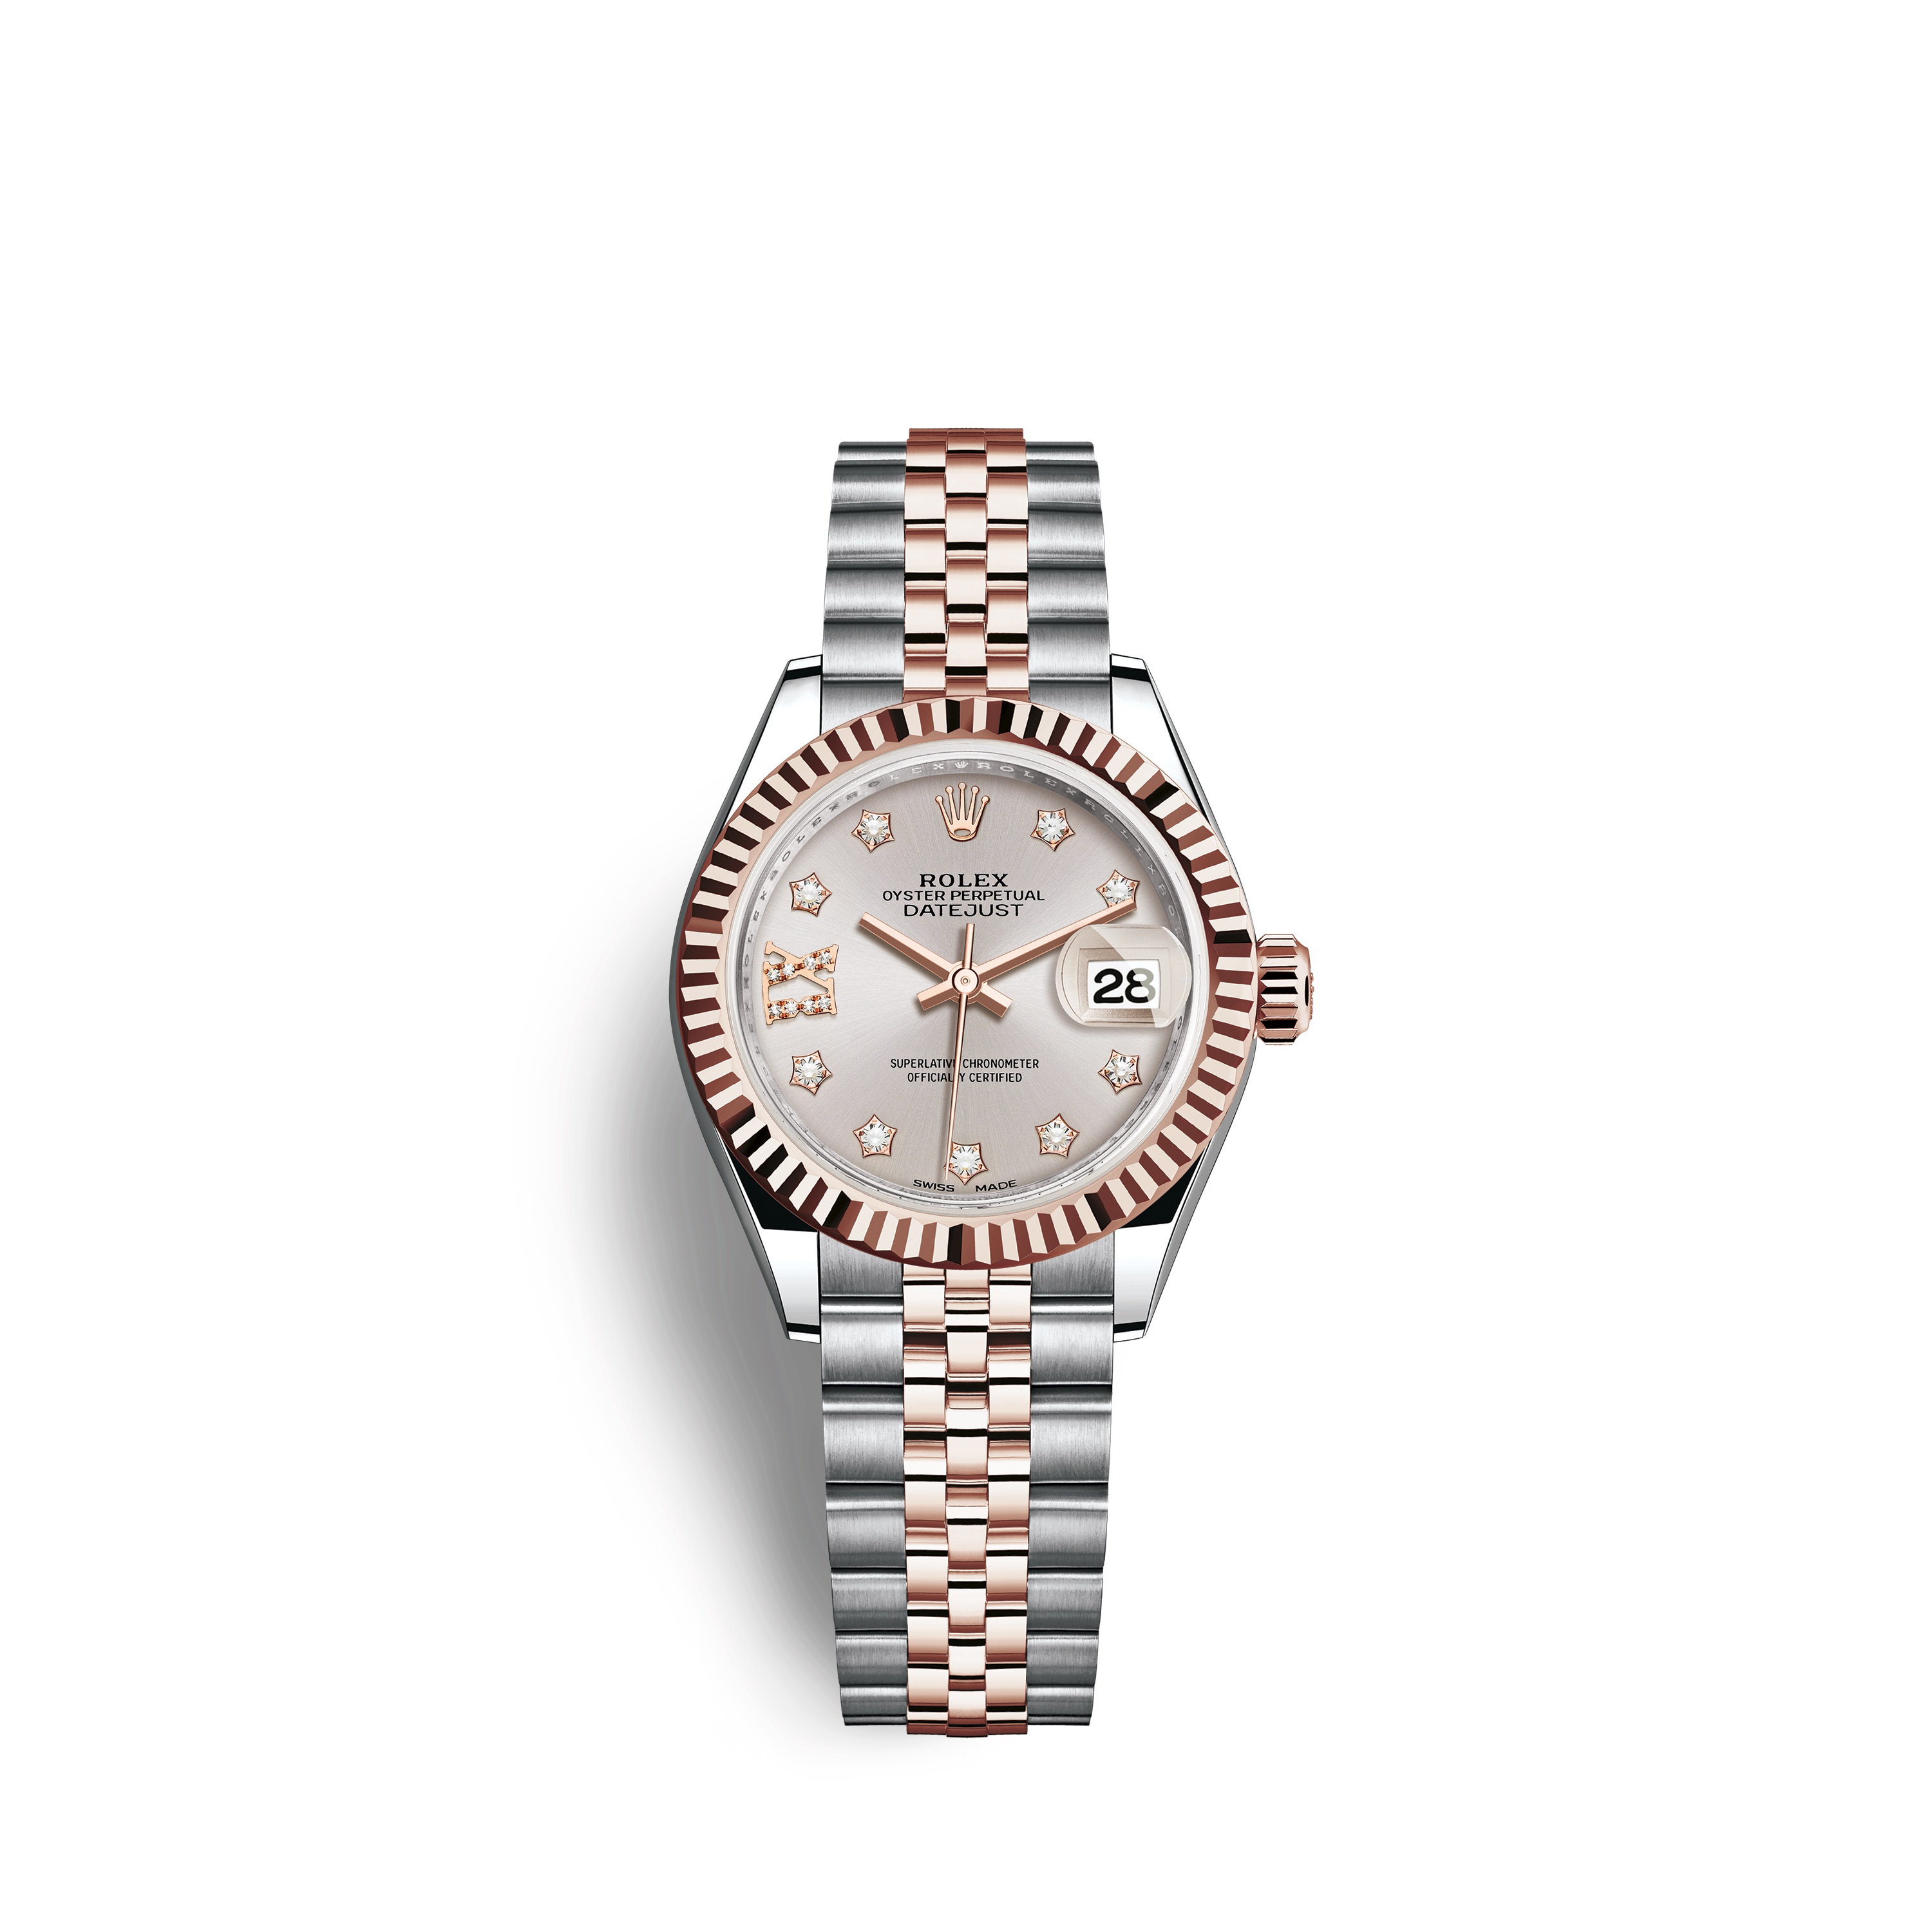 Lady-Datejust 28 279171 Rose Gold & Stainless Steel Watch (Sundust Set with Diamonds)